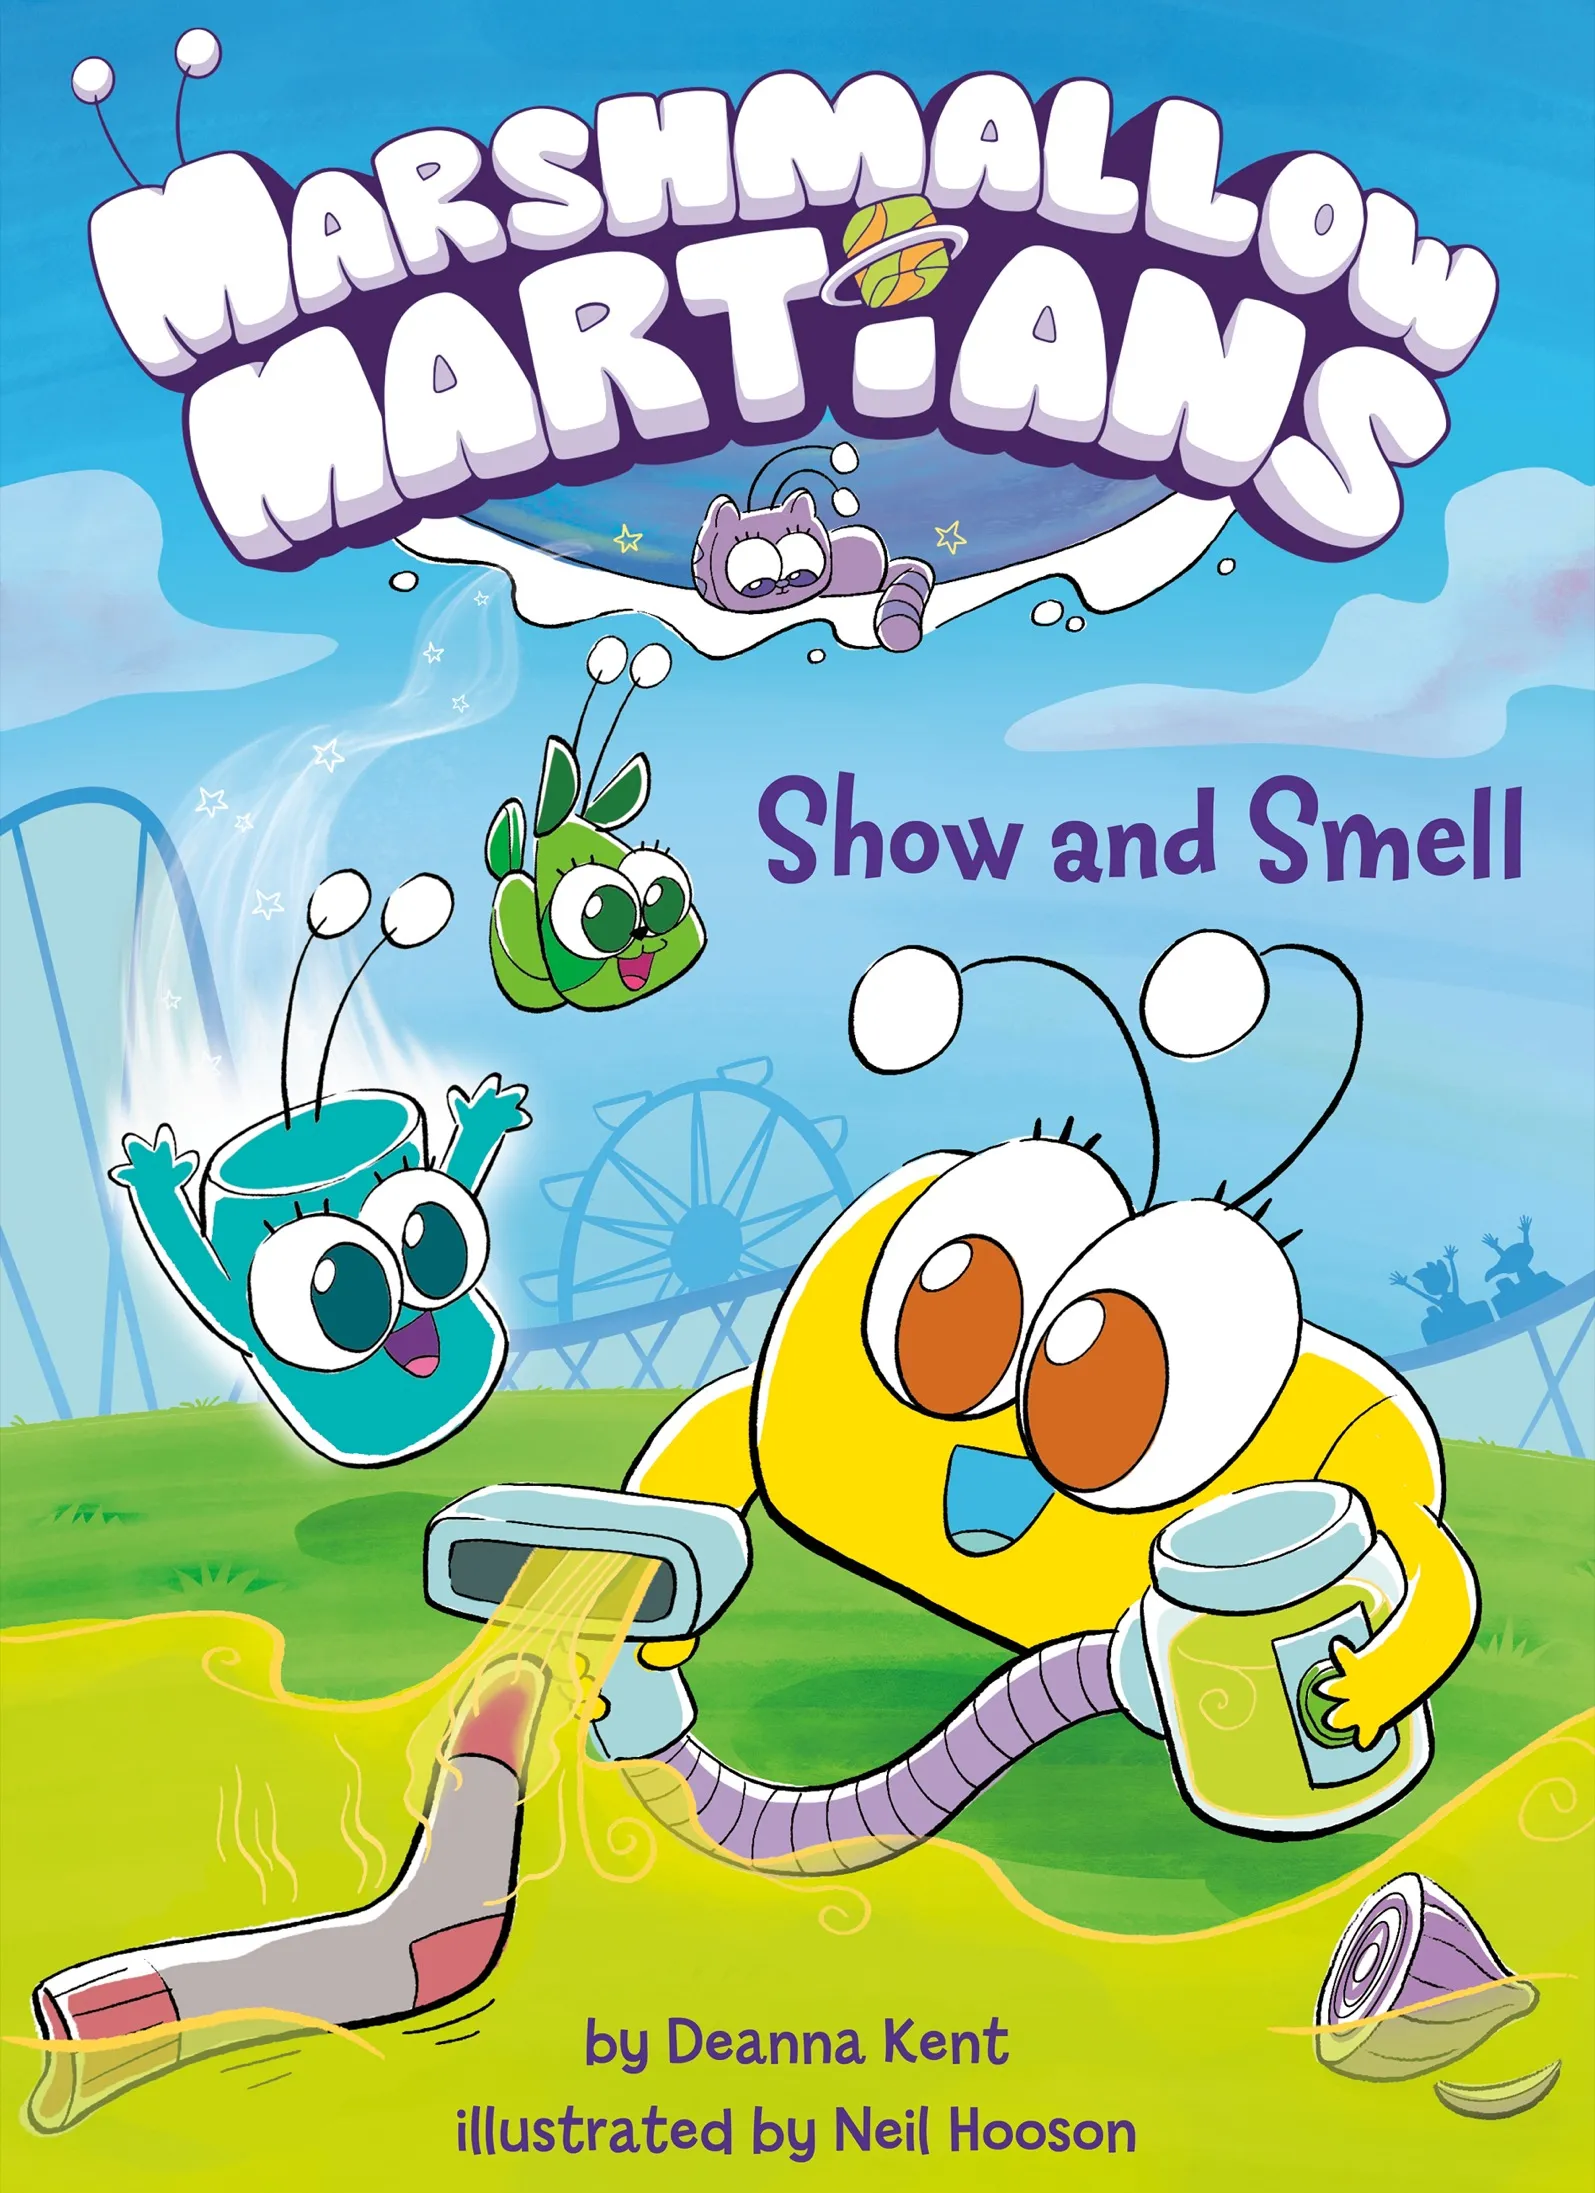 Show and Smell (Marshmallow Martians #1)